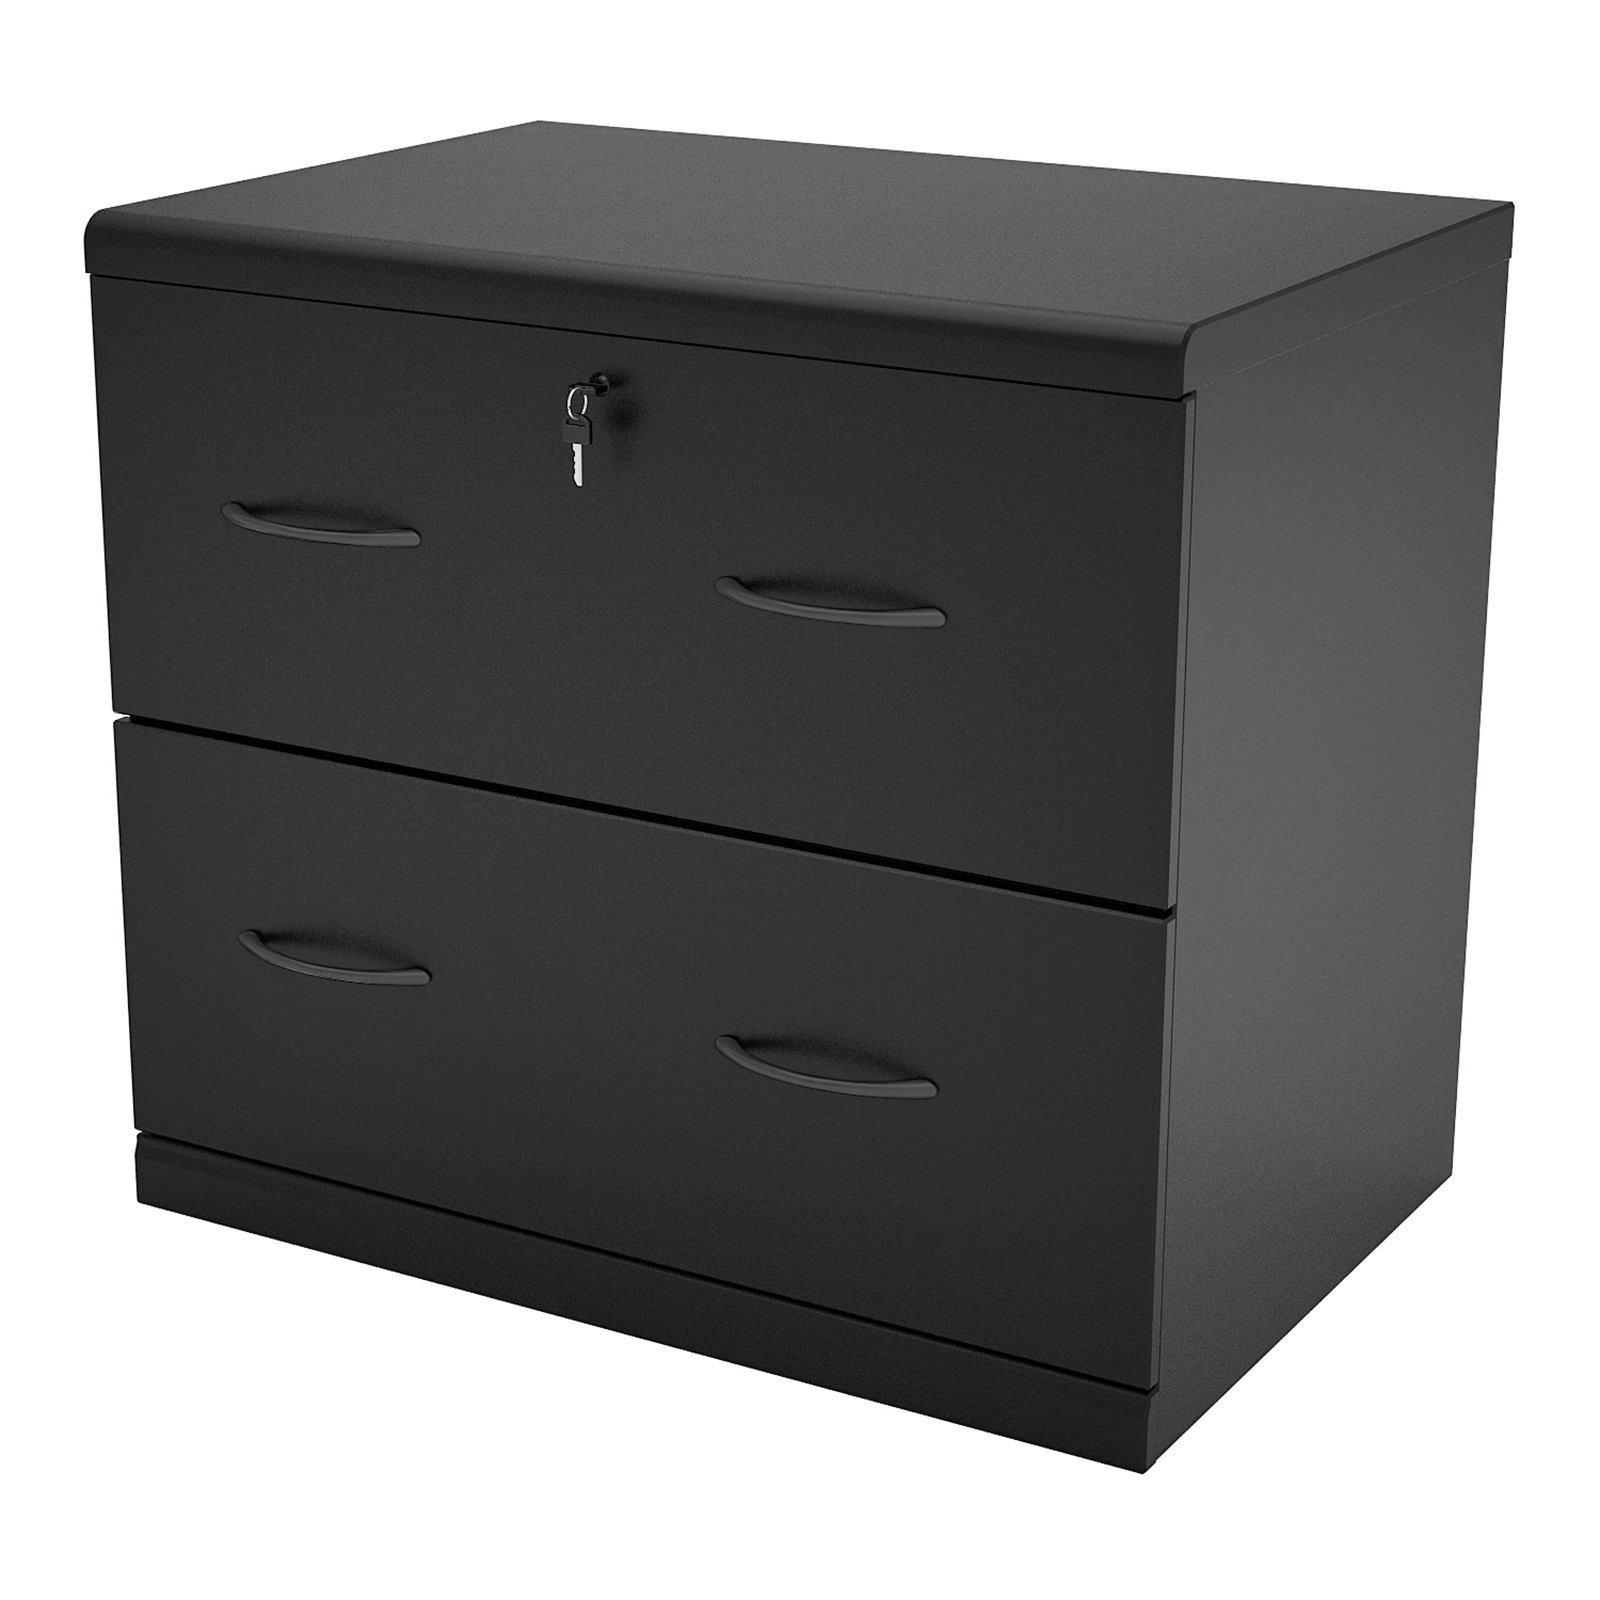 2 Drawer Lateral Wood Lockable Filing Cabinet Black Walmart in proportions 1600 X 1600